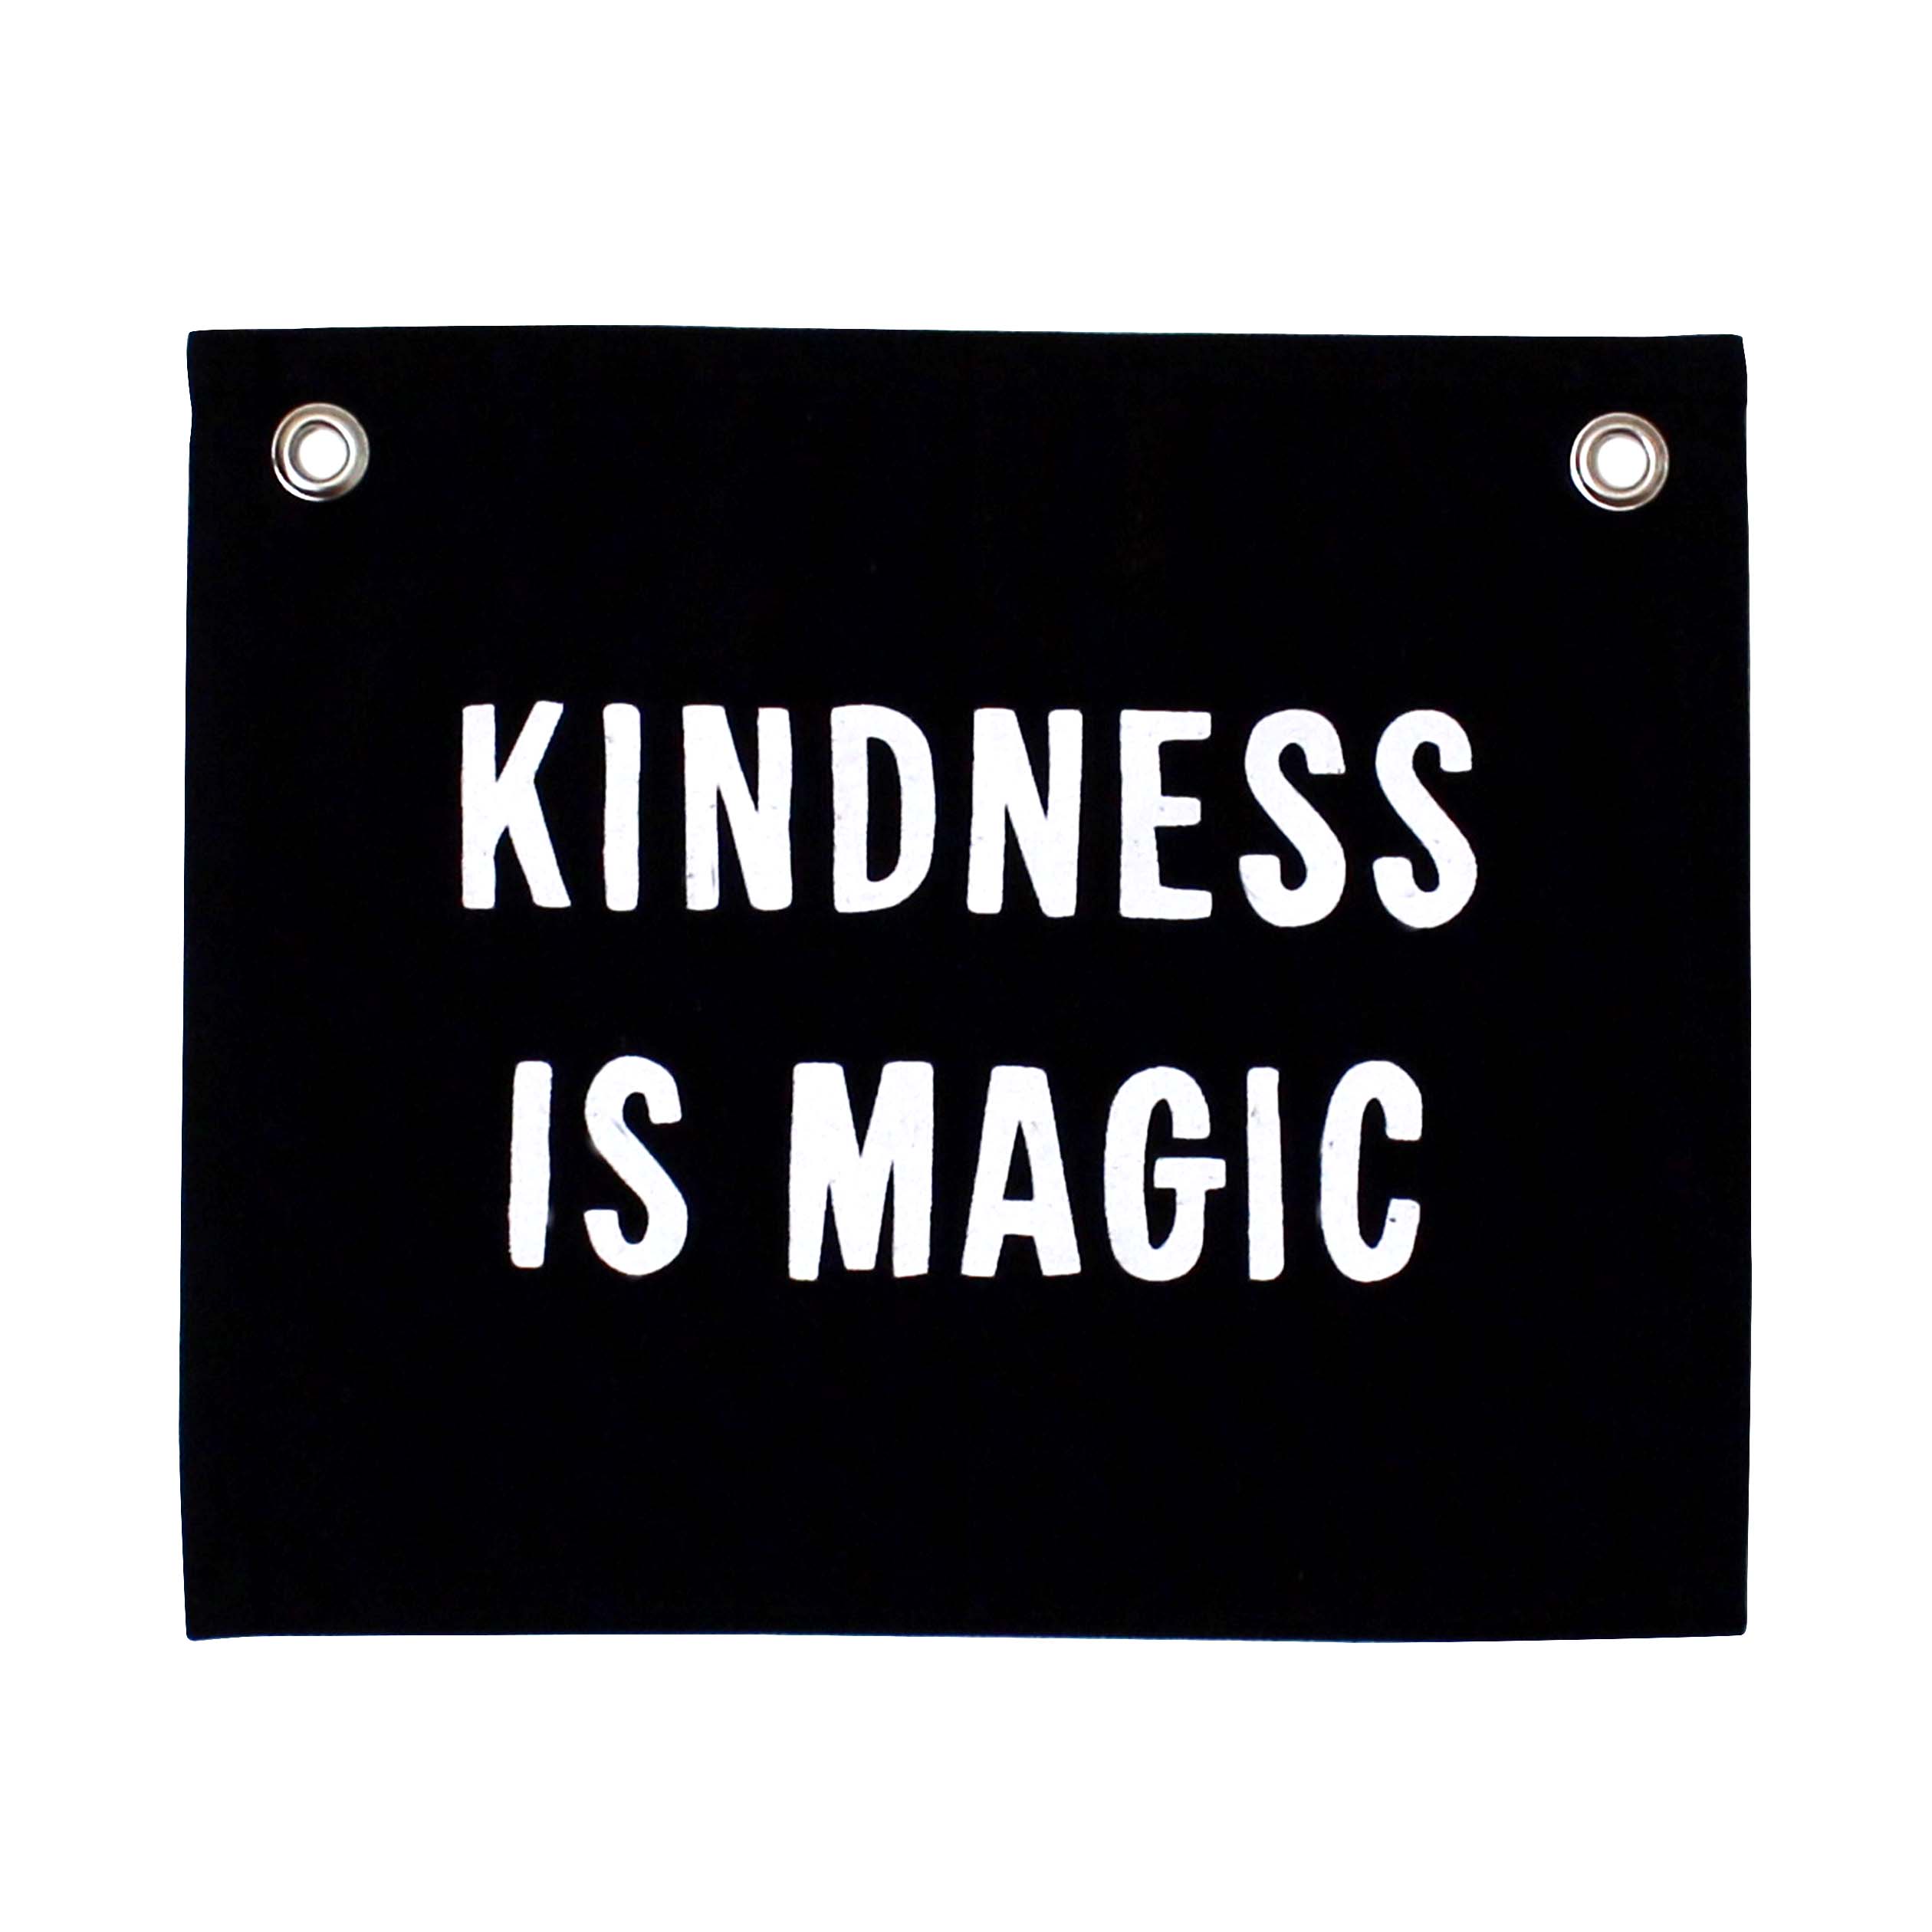 kindness is magic banner